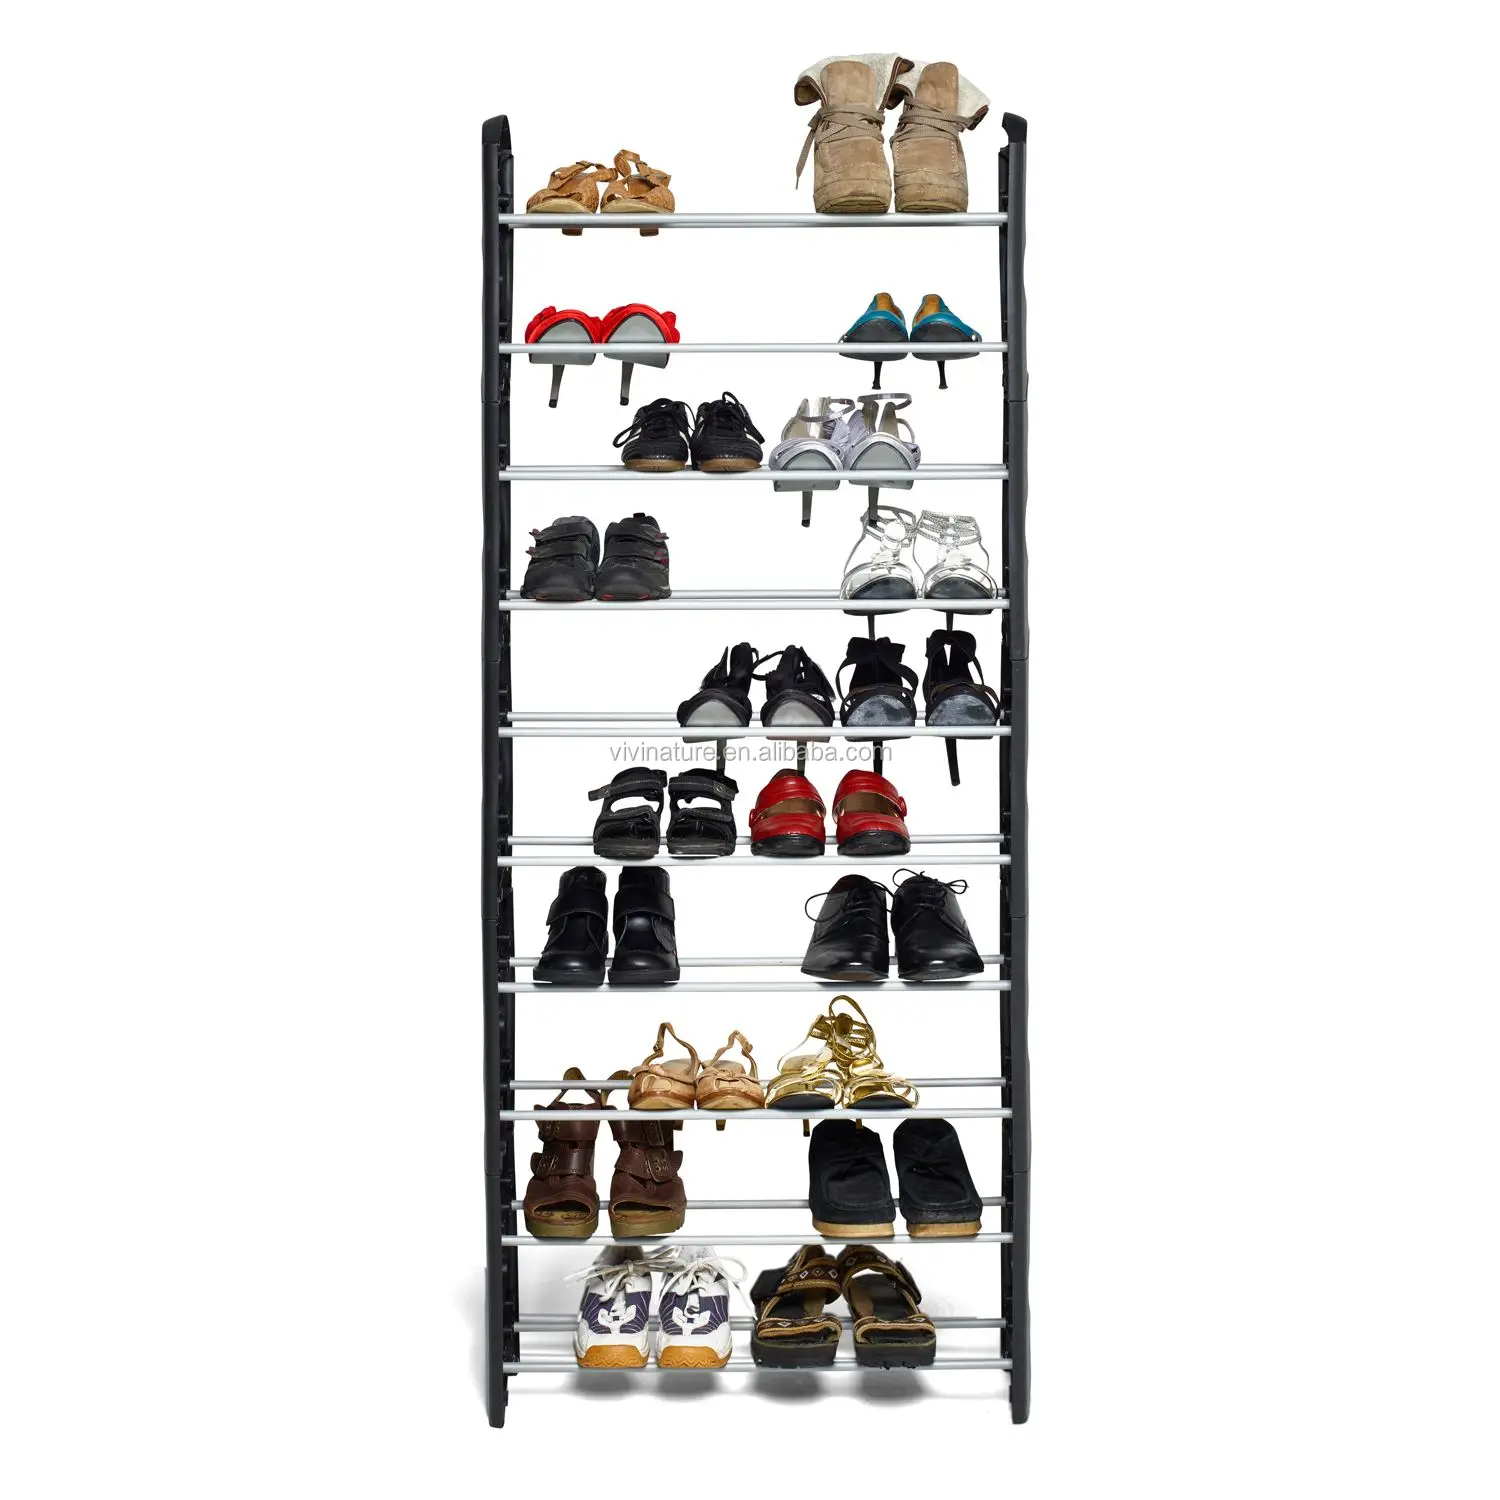 Vertical Shoe Rack And Shoes Organizator Buy Vertical Shoe Rack Shoes Organizator Furniture For Shoe Store Product On Alibaba Com